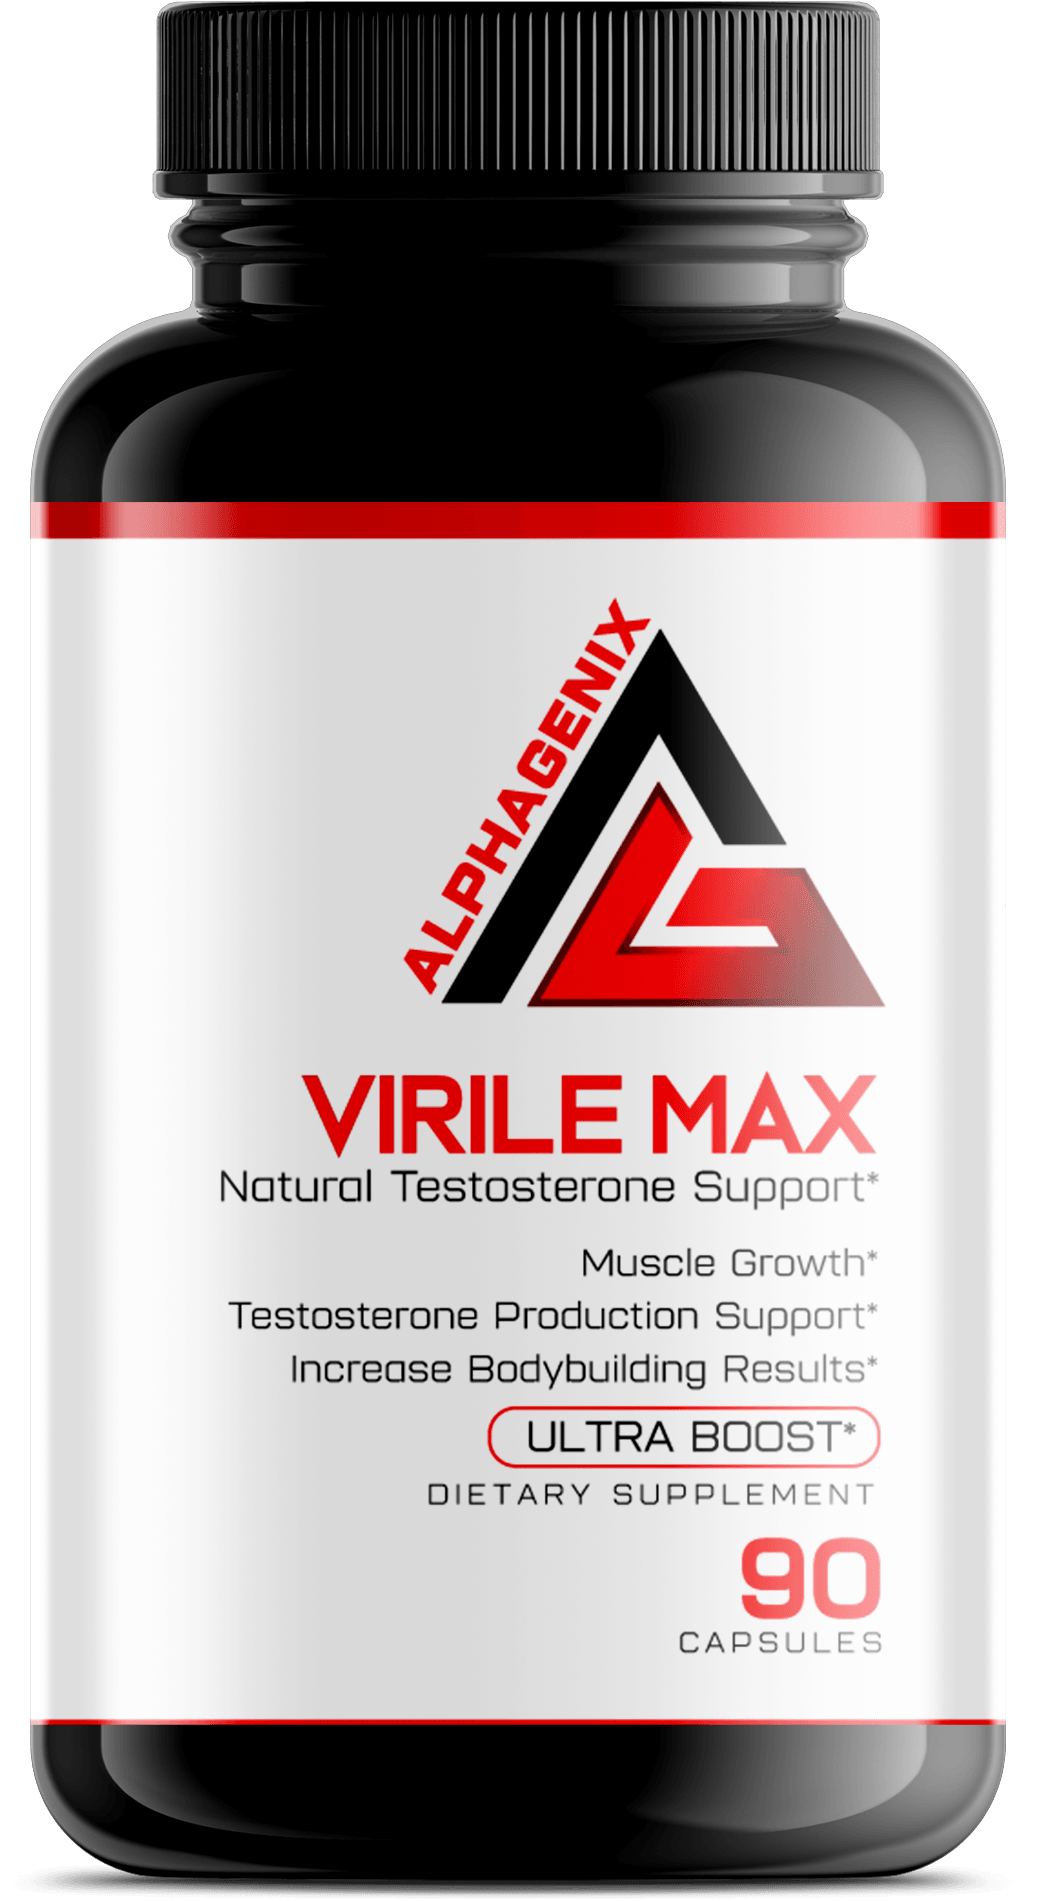 VirileMax - Natural Testosterone Support for Muscle Growth & Bodybuilding Results - AlphaGenix